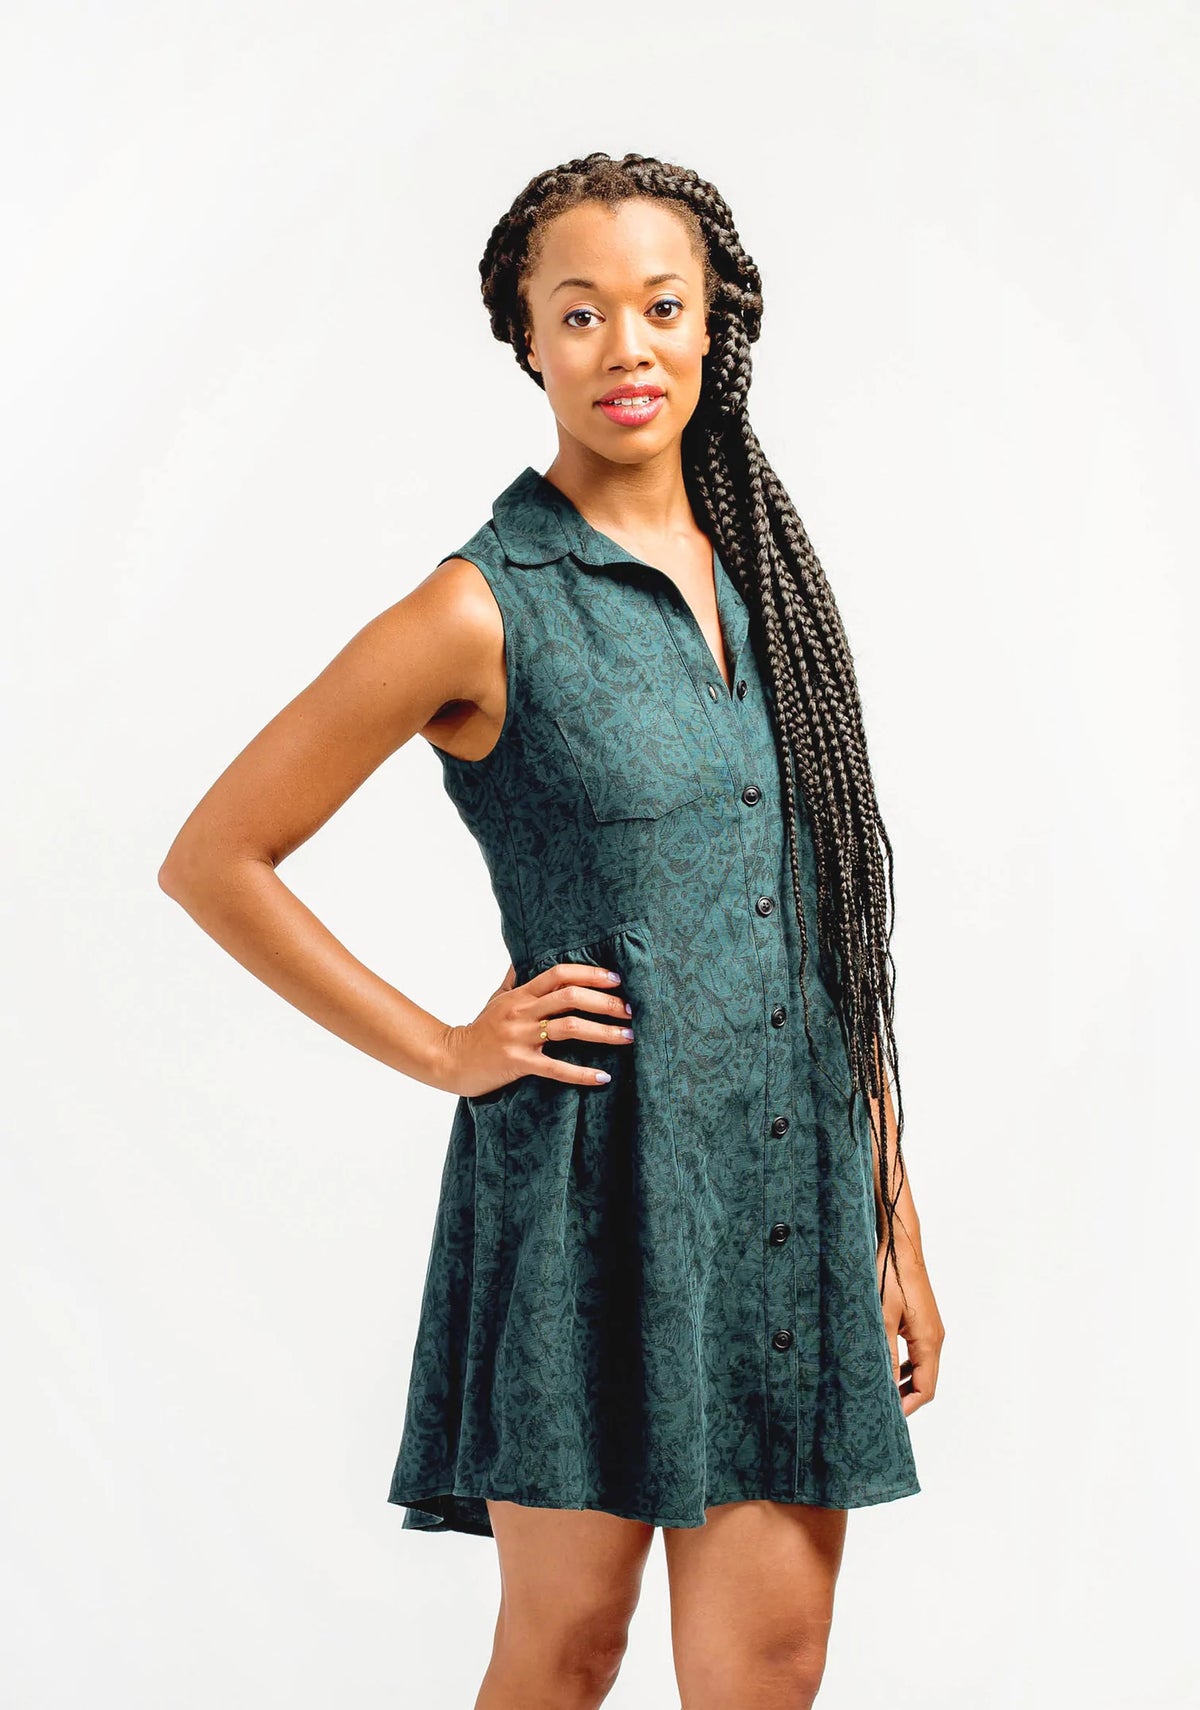 Model Lauren is wearing a size 8, view B Alder Shirtdress in a green patterned fabric. She is modeling the front side of the shirtdress.